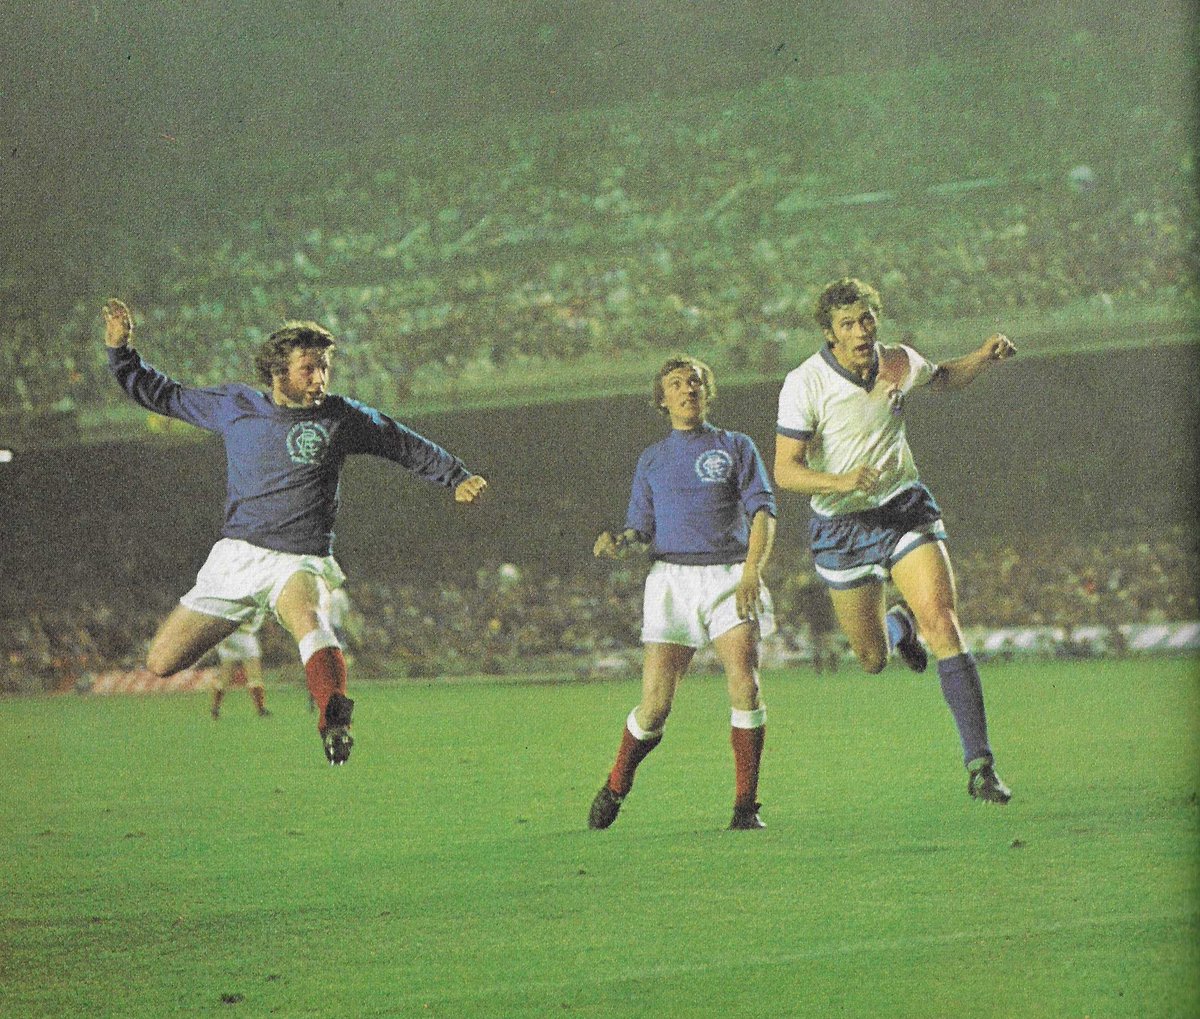 From the Shoot! Soccer Quiz Book 1974 comes a cracking photo of Alex MacDonald in the ECWC Final of 1972.